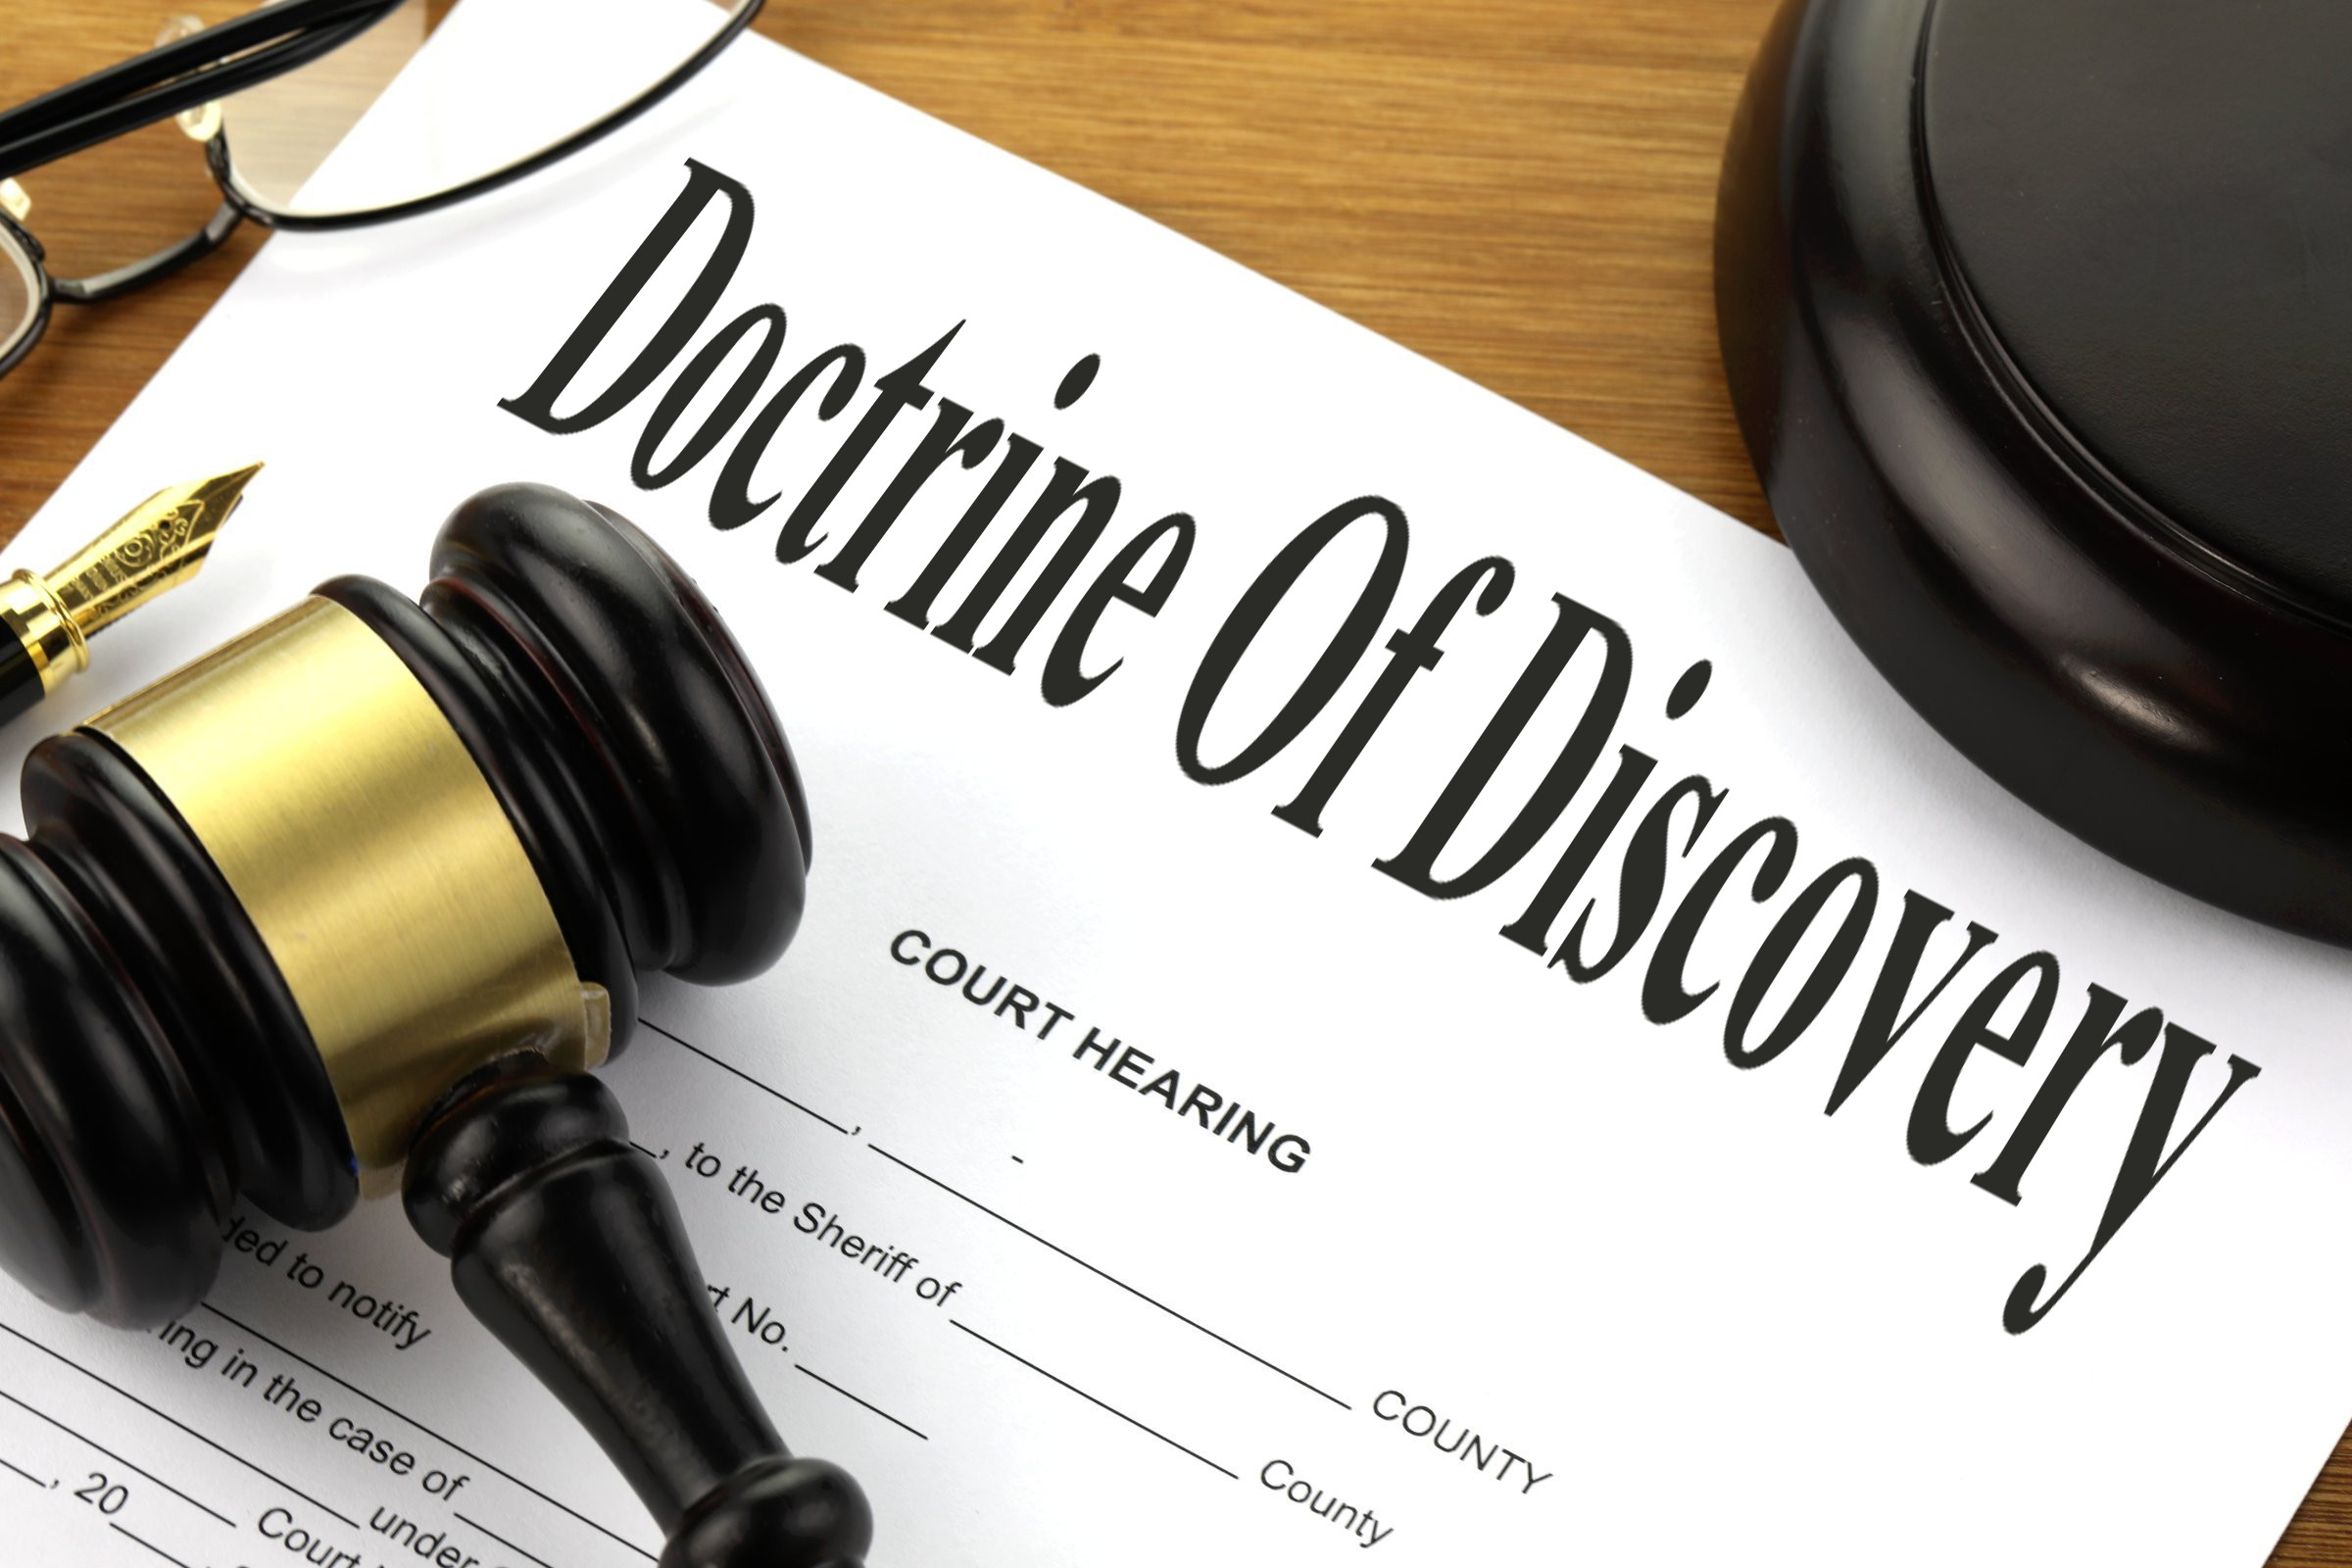 Doctrine Of Discovery